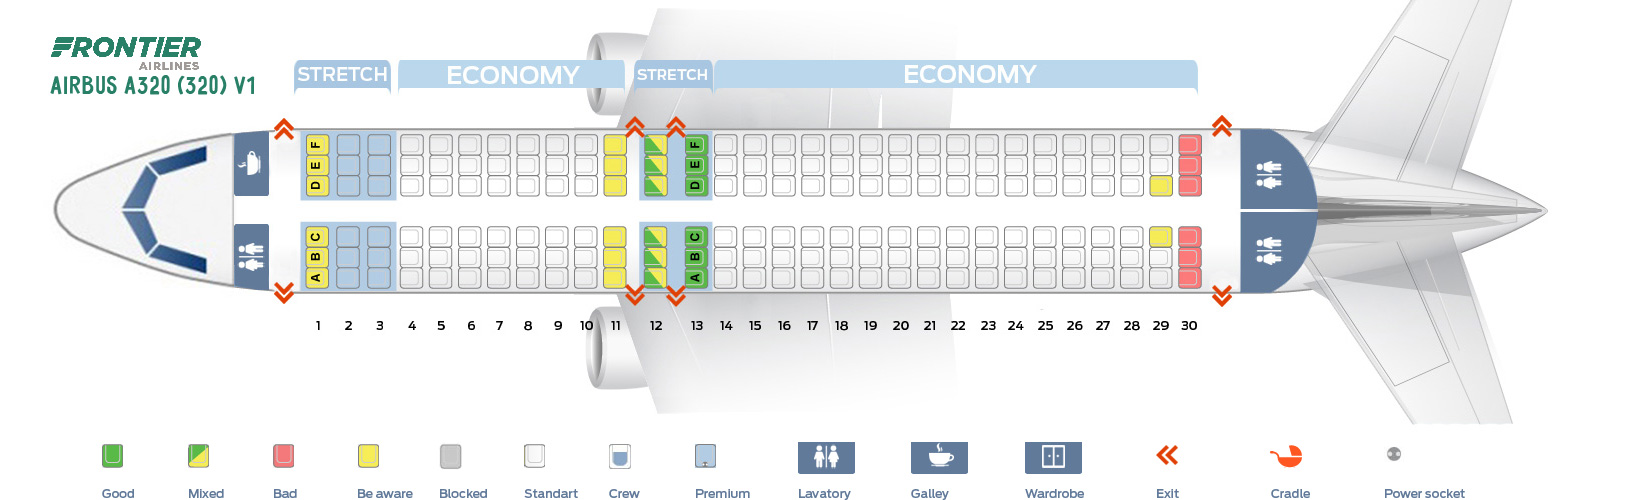 Airbus A320 Seating Chart Frontier